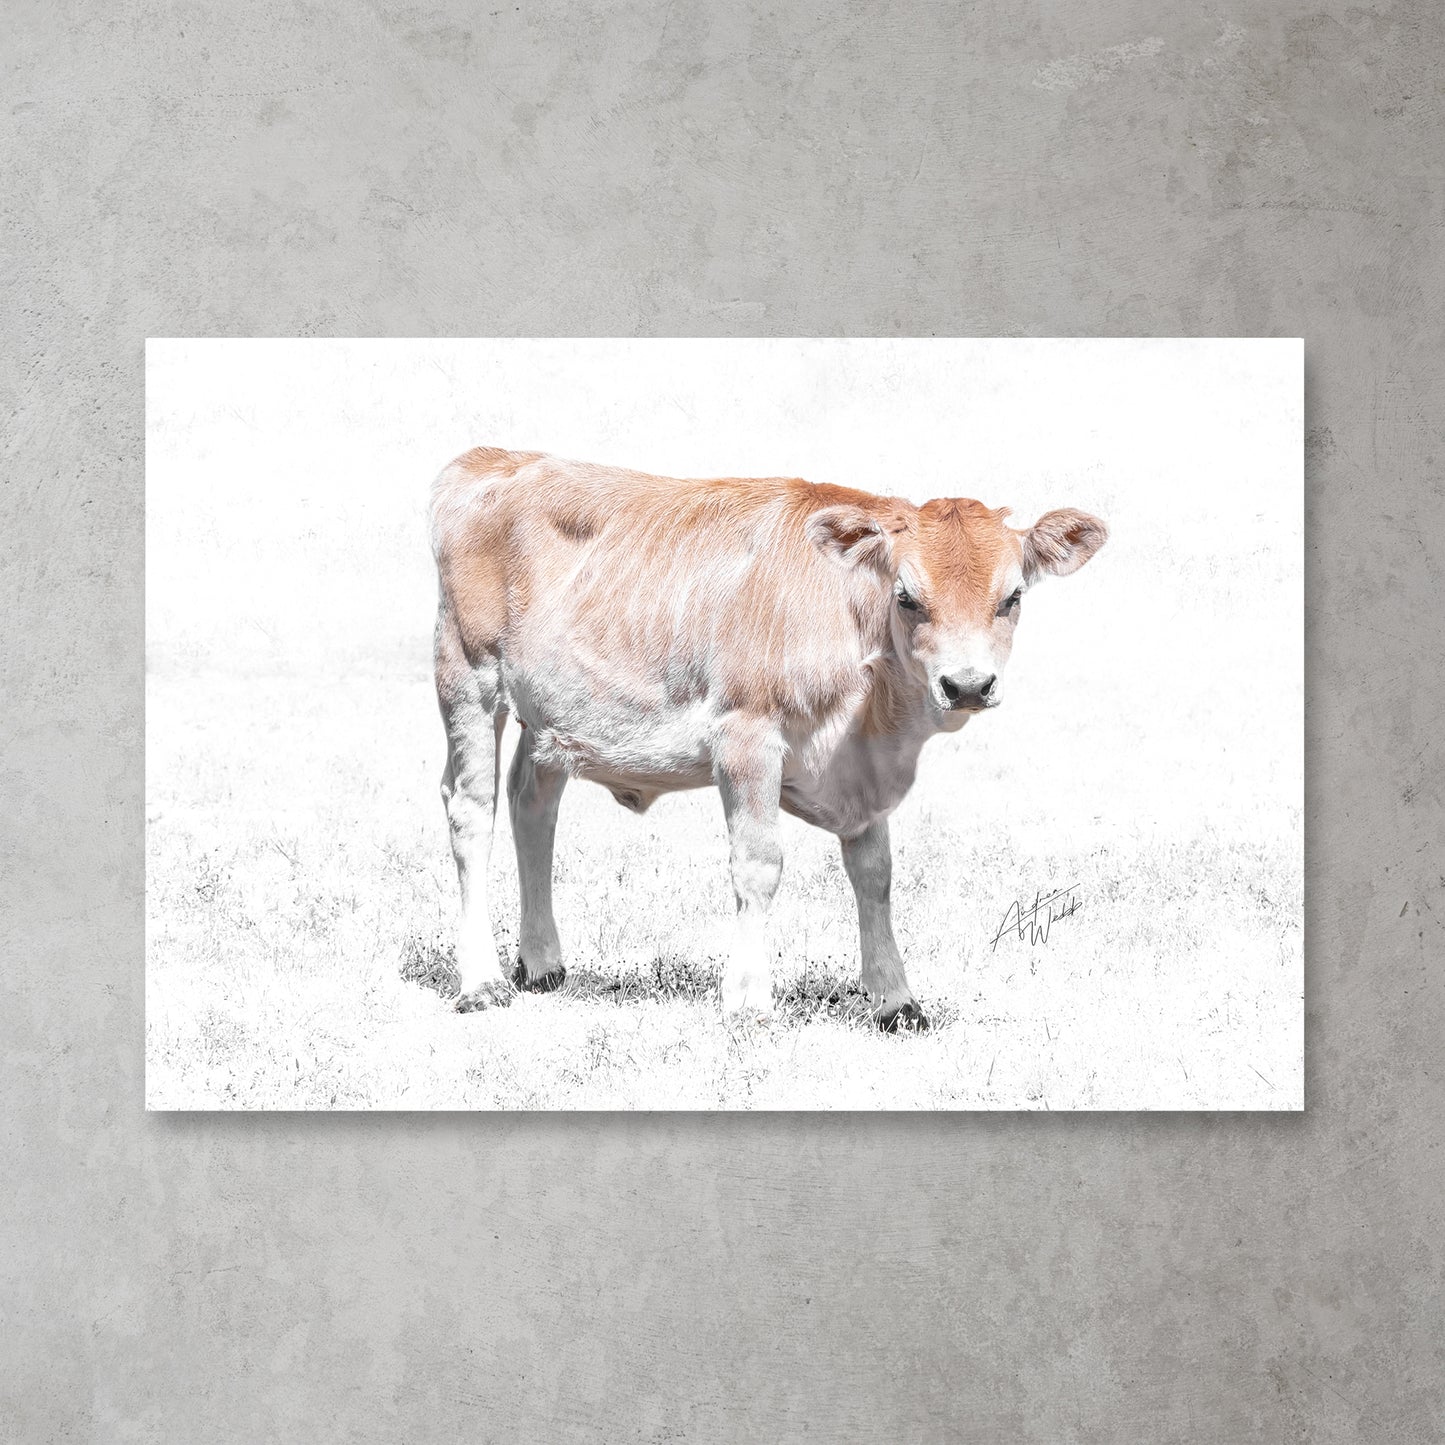 A Jersey Calf Heifer Cow in a White Background Field Fine Art Portrait. Cow art. Cow photography. Cow artwork. Cow wall art. Cow prints. Cow canvases. Cow gifts. Animal photography.